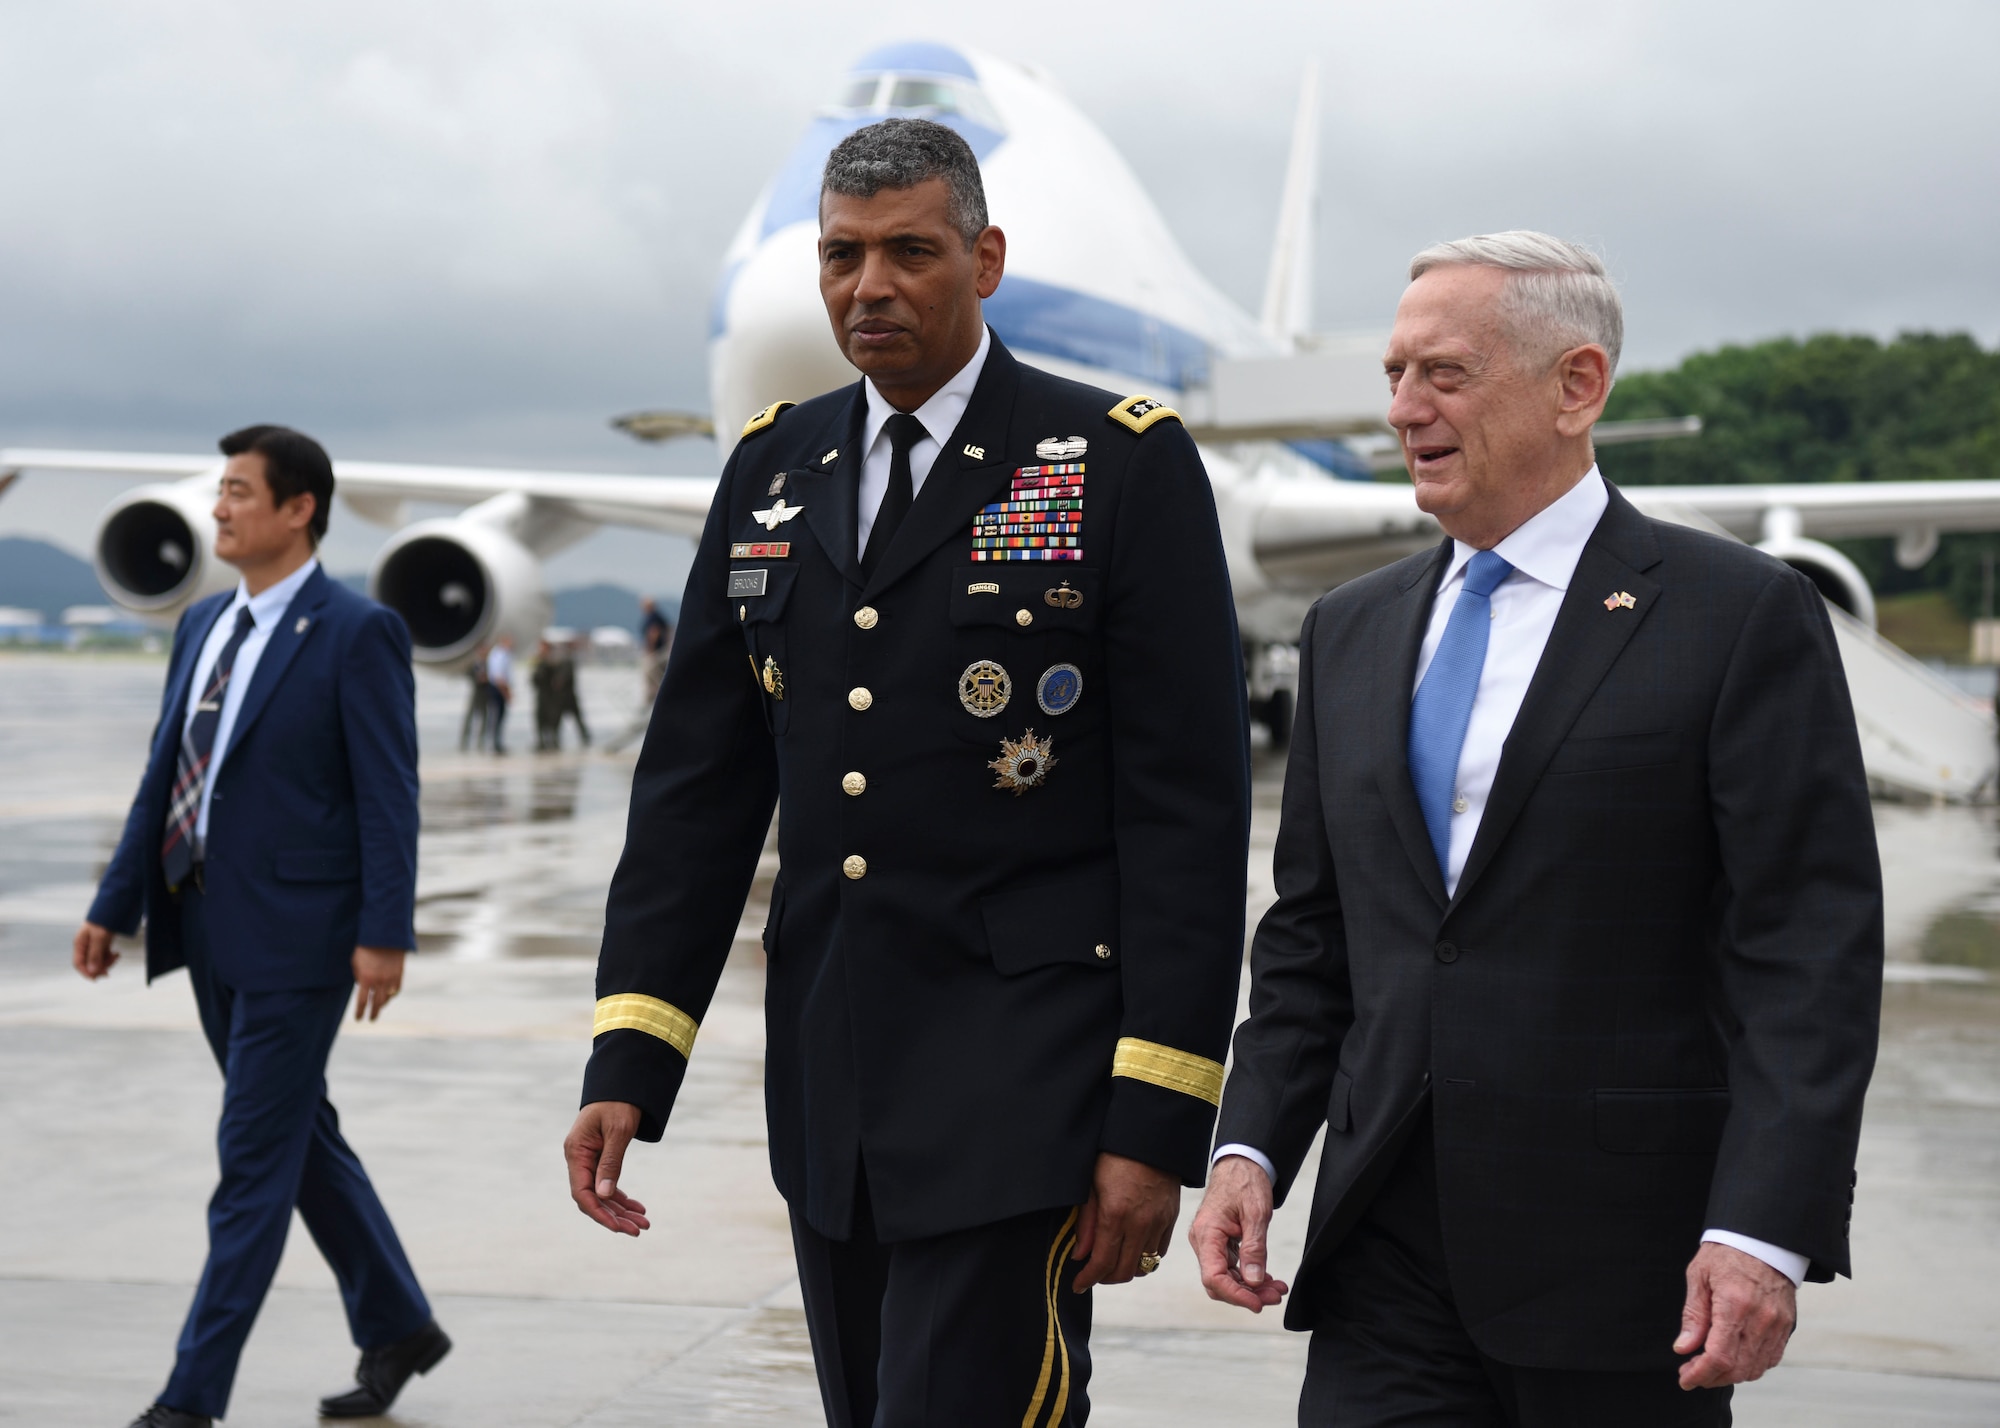 U.S. Secretary of Defense James Mattis, right, arrives at Osan Air Base, Republic of Korea, June 28, 2018. During his visit, he will meet with the minister of defense as part of his Asia trip to China, ROK, and Japan. (U.S. Air Force photo by Airman 1st Class Ilyana A. Escalona)